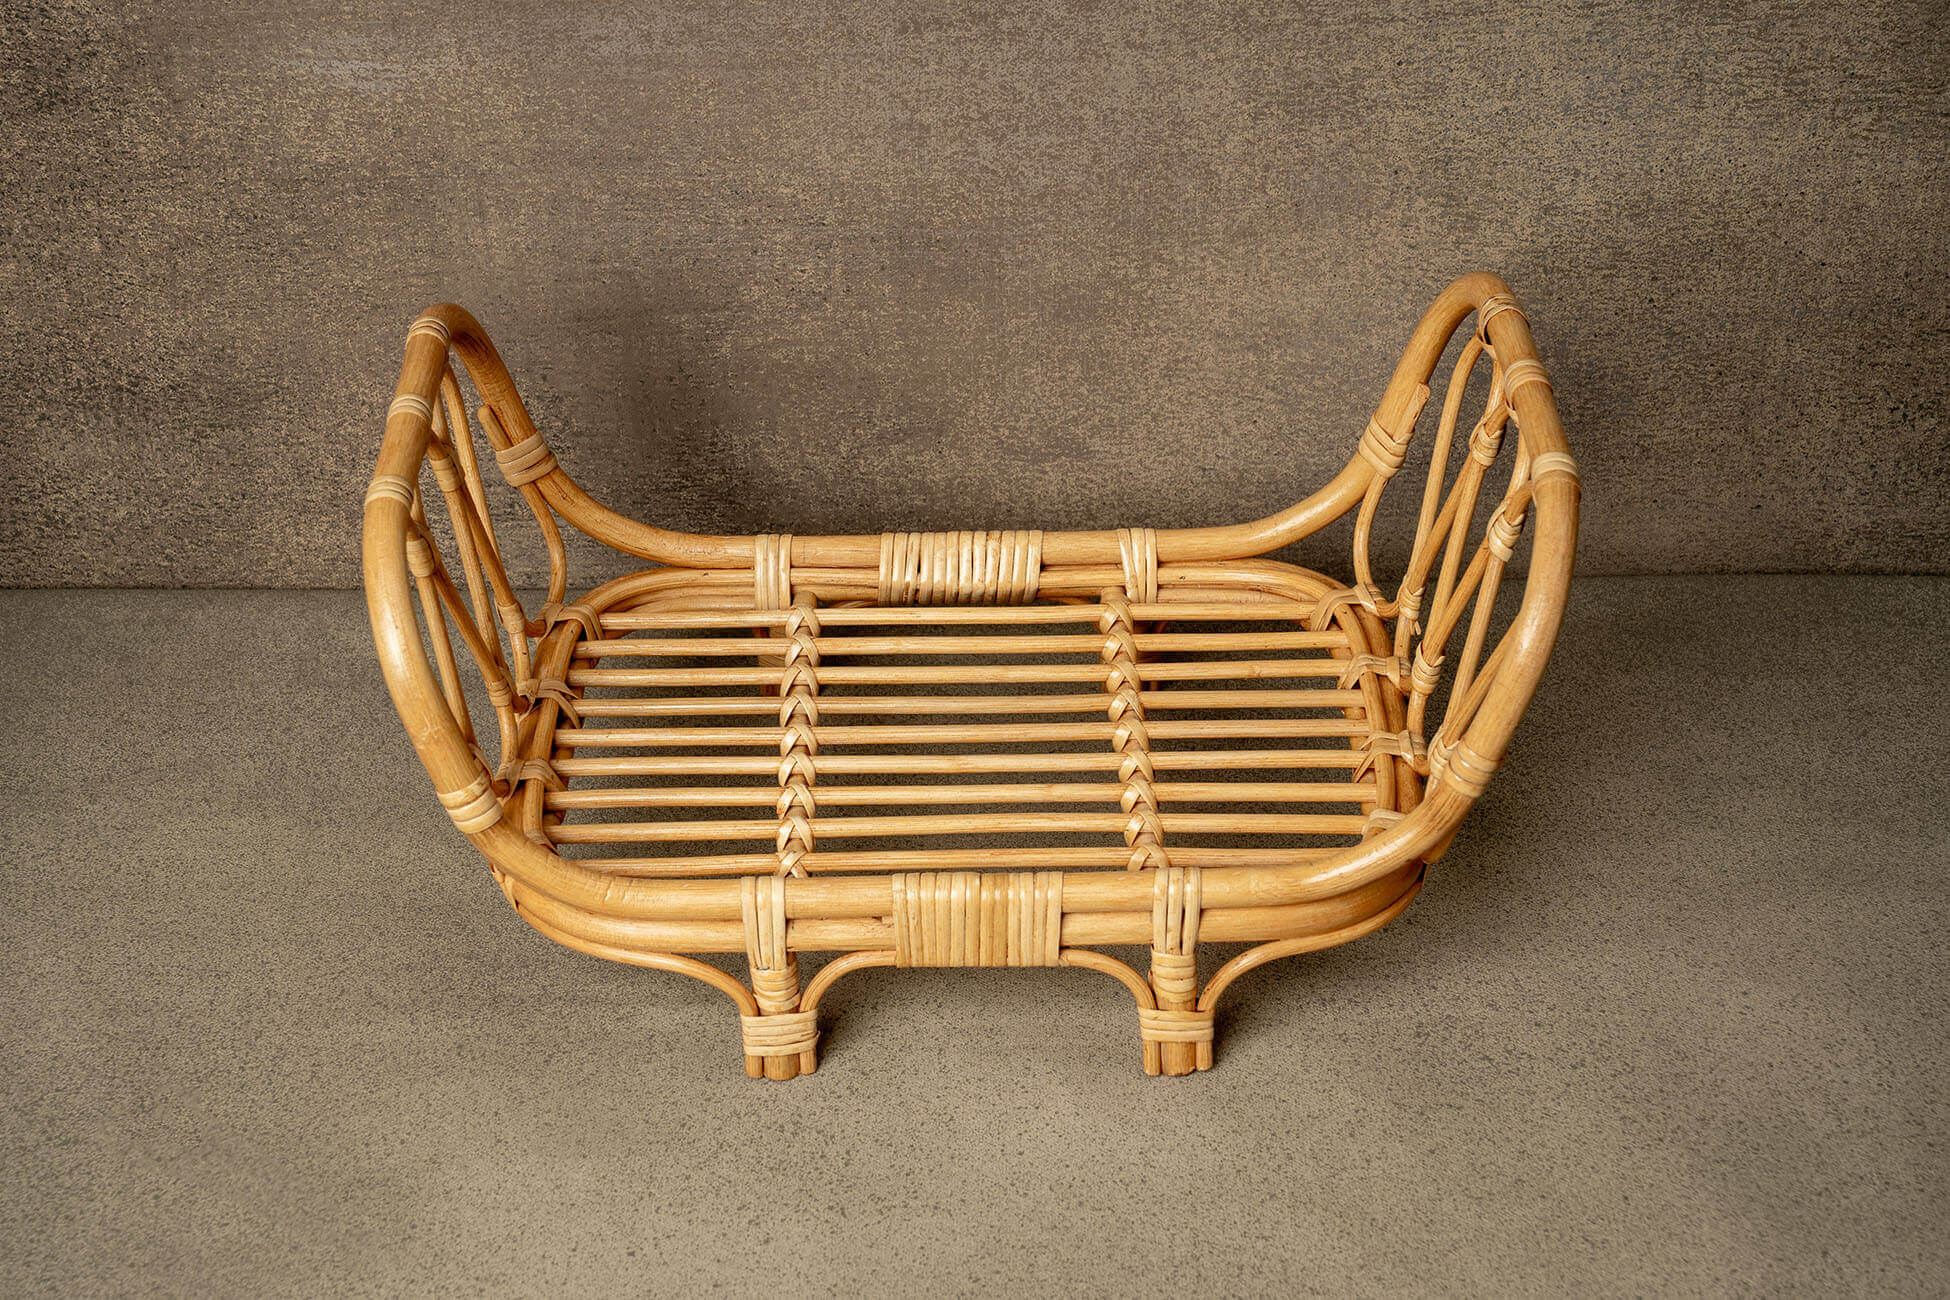 Kate Bamboo Woven Chair Bed Newborn Bed Props